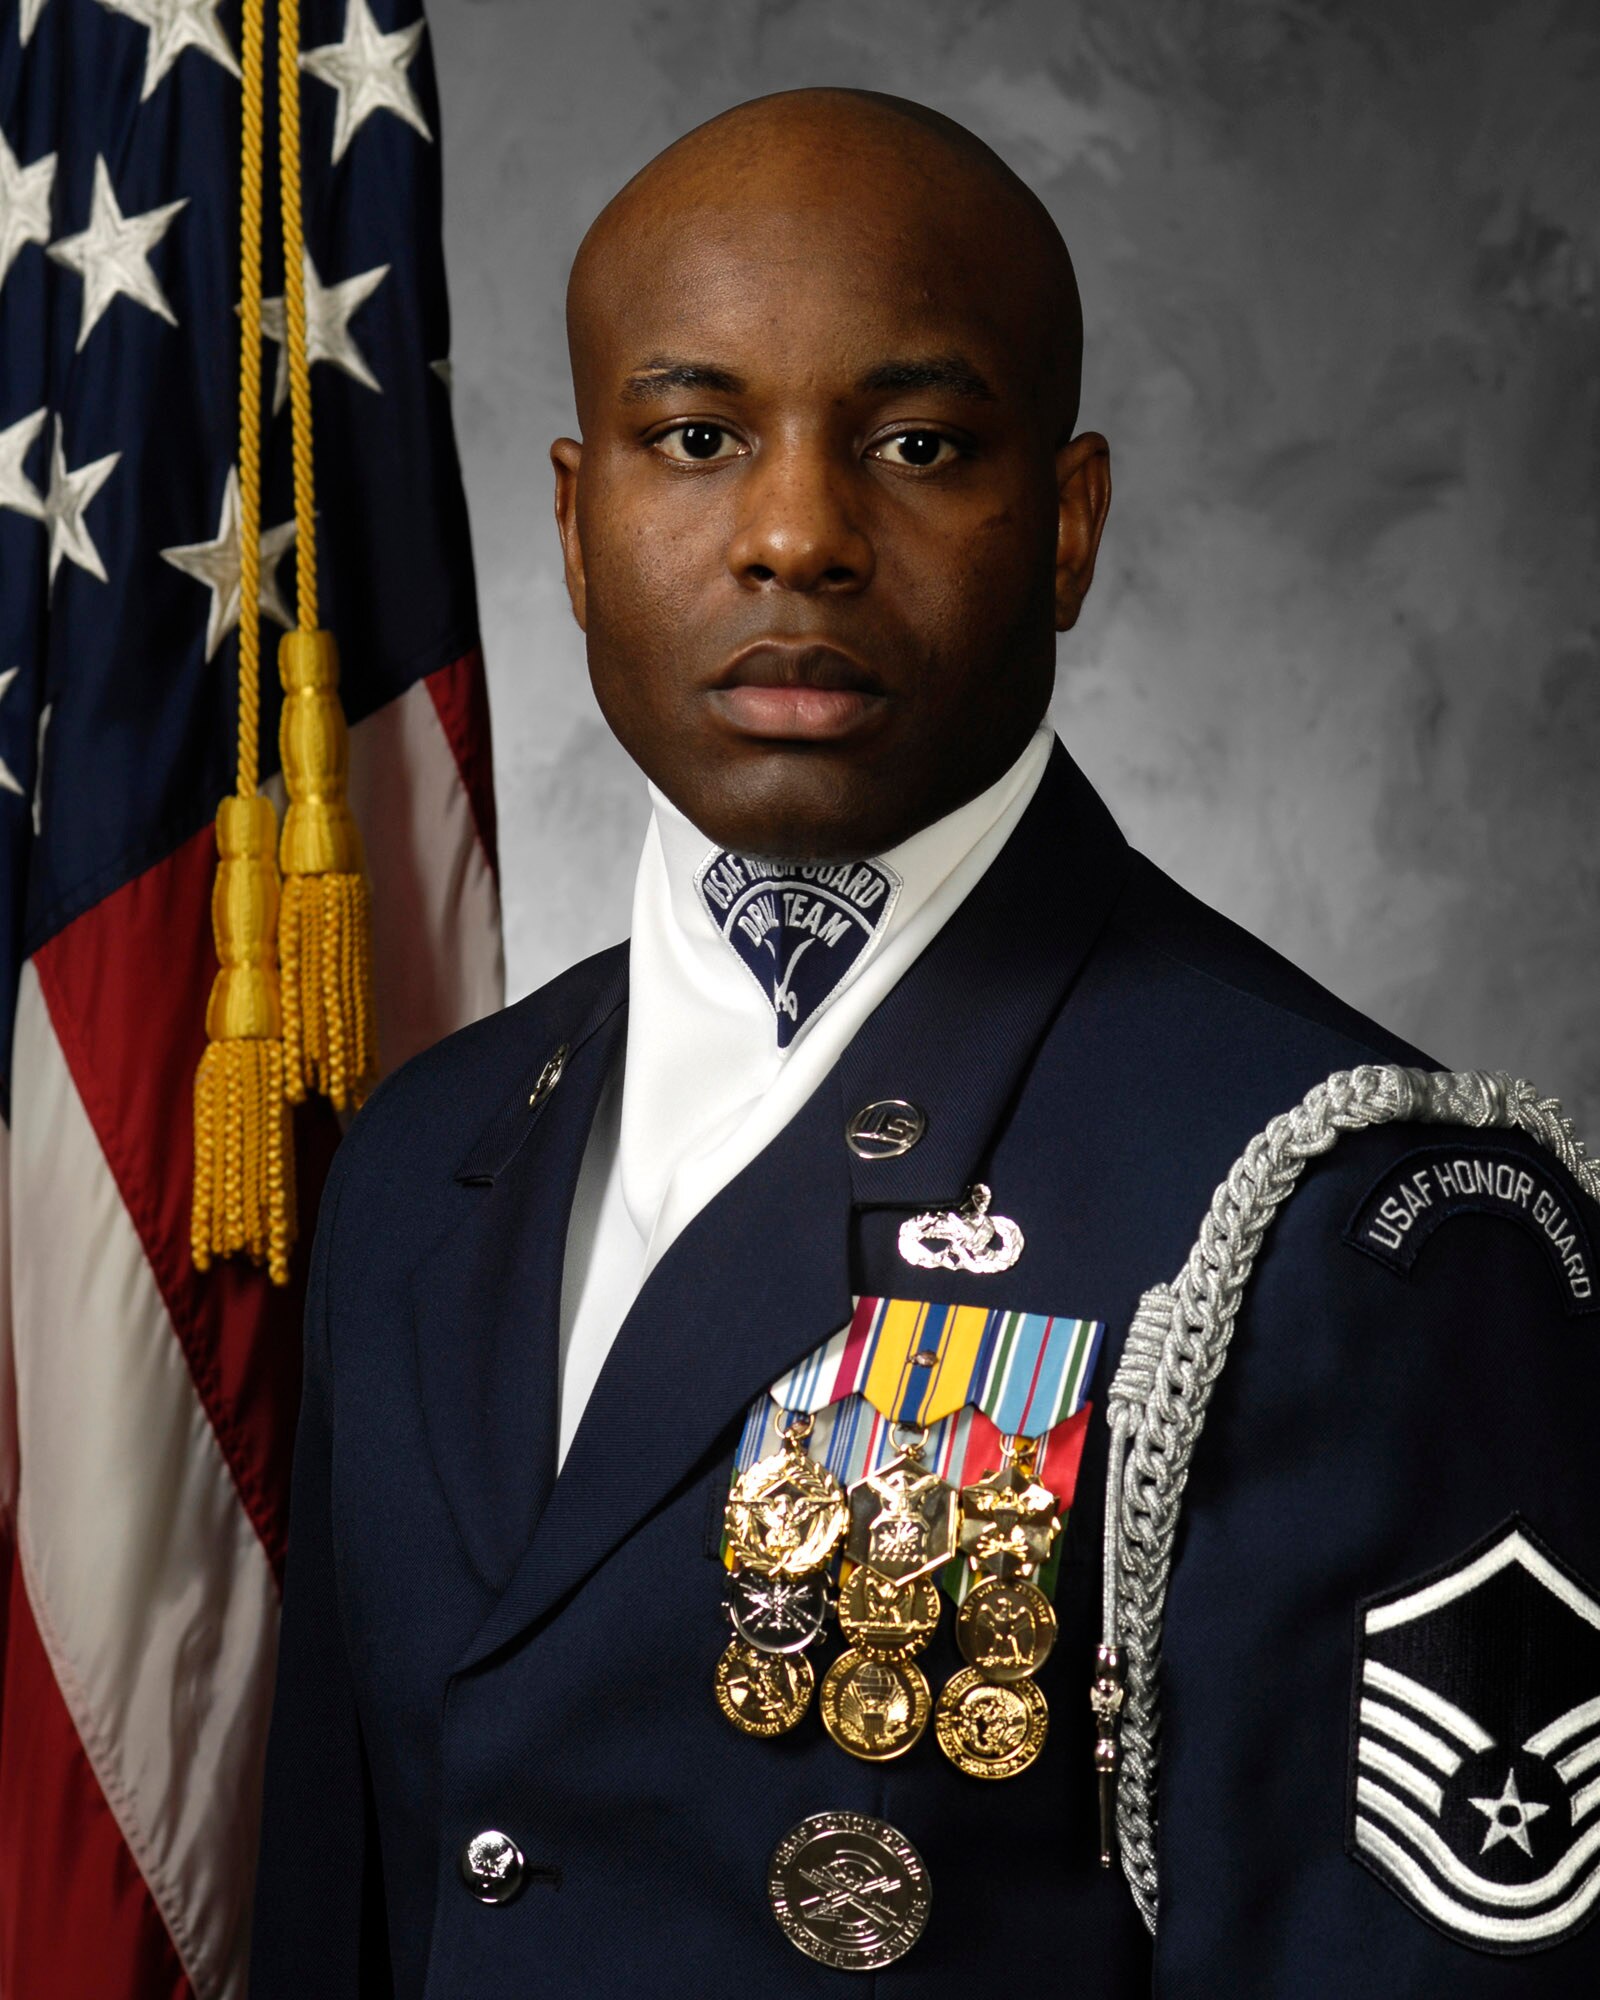 Master Sergeant Steven P. West is the drill team flight chief for the United States Air Force Honor Guard. “He is an example for all military members to emulate,” Colonel Taylor wrote in Sergeant West’s nomination package. “He represents the Air Force’s finest.” Sergeant West led more than 750 Airmen in 16 full honors funerals and also orchestrated scheduling and direction for 714 ceremonies with 100 percent mission success. Sergeant West shared the Air Force story through 112 drills, embedding the Air Force footprint during 13 high school and 17 Air Force base performances in 50 cities. He completed 12 credit hours toward his bachelor’s degree in management studies. (U.S. Air Force photo by Senior Airman Sean Adams)